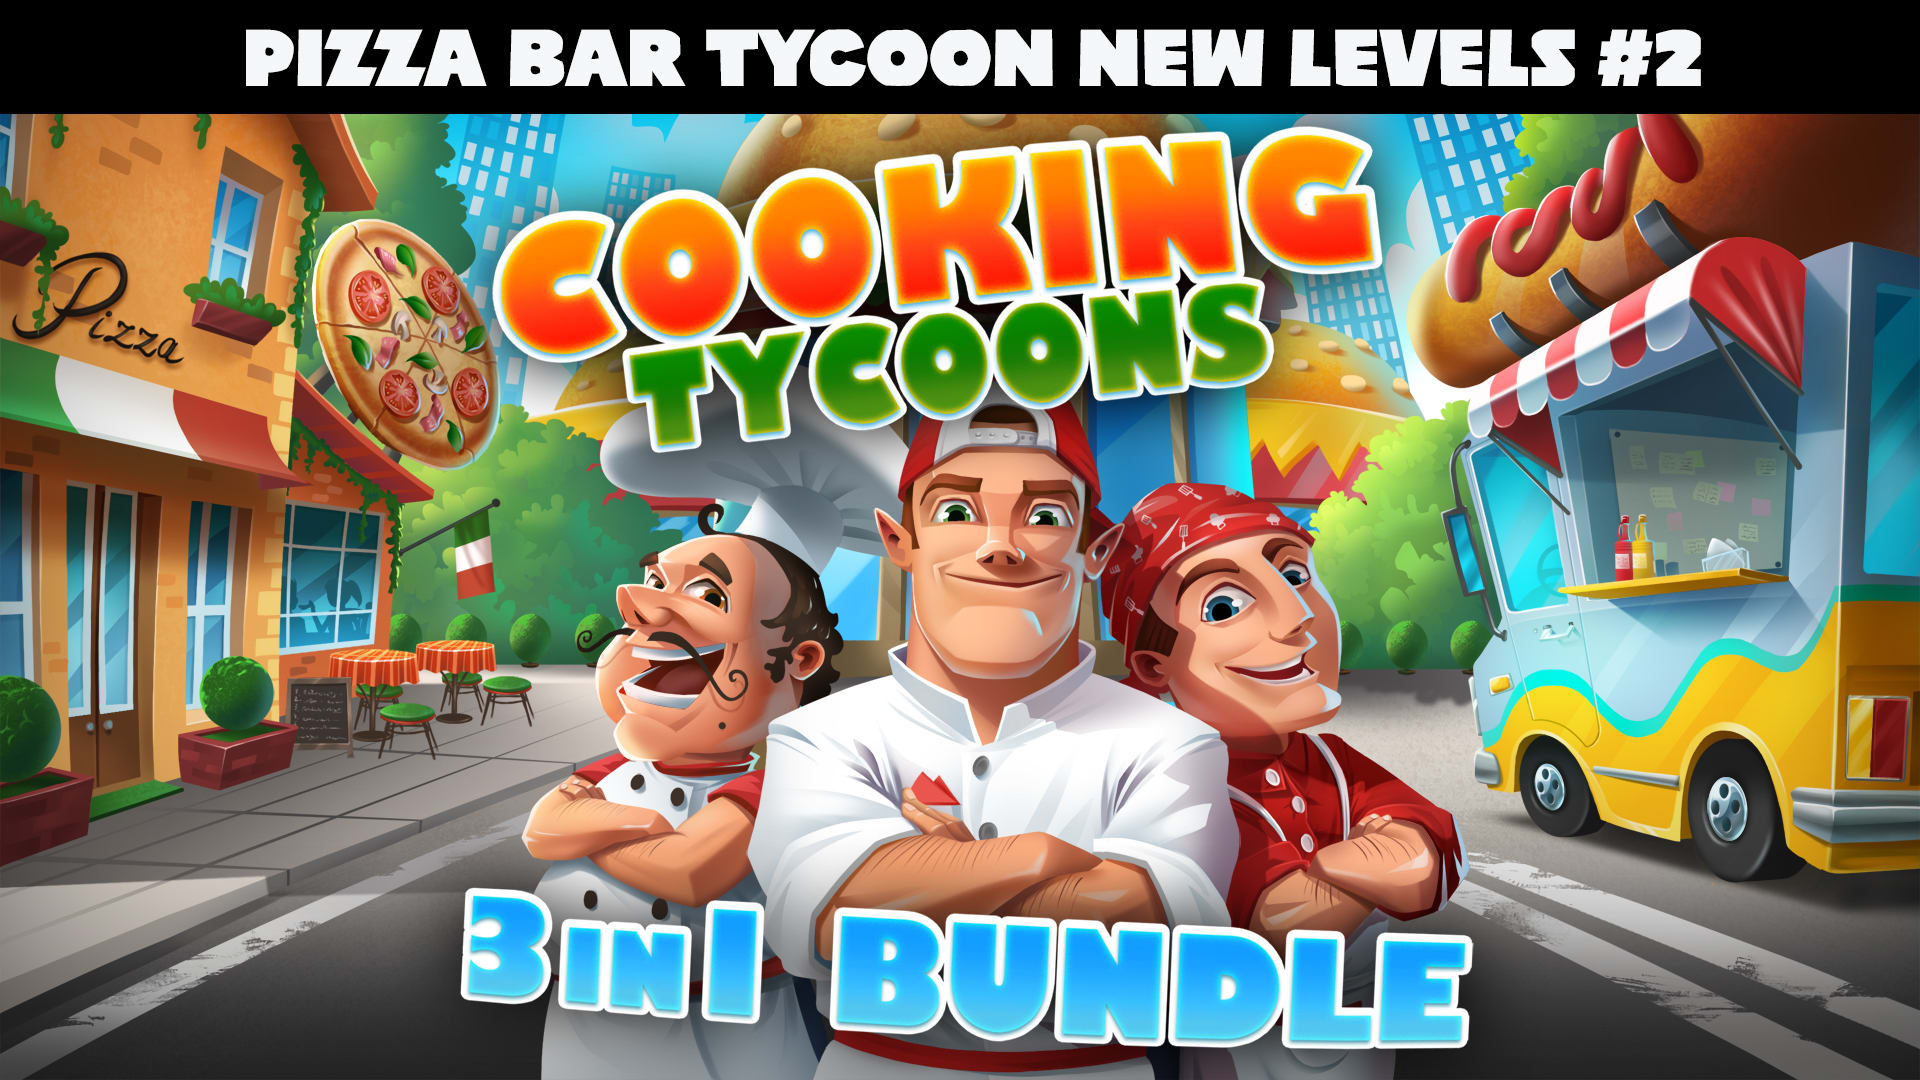 Cooking Tycoons: 3 in 1 Bundle - Pizza Bar Tycoon New Levels #2 1